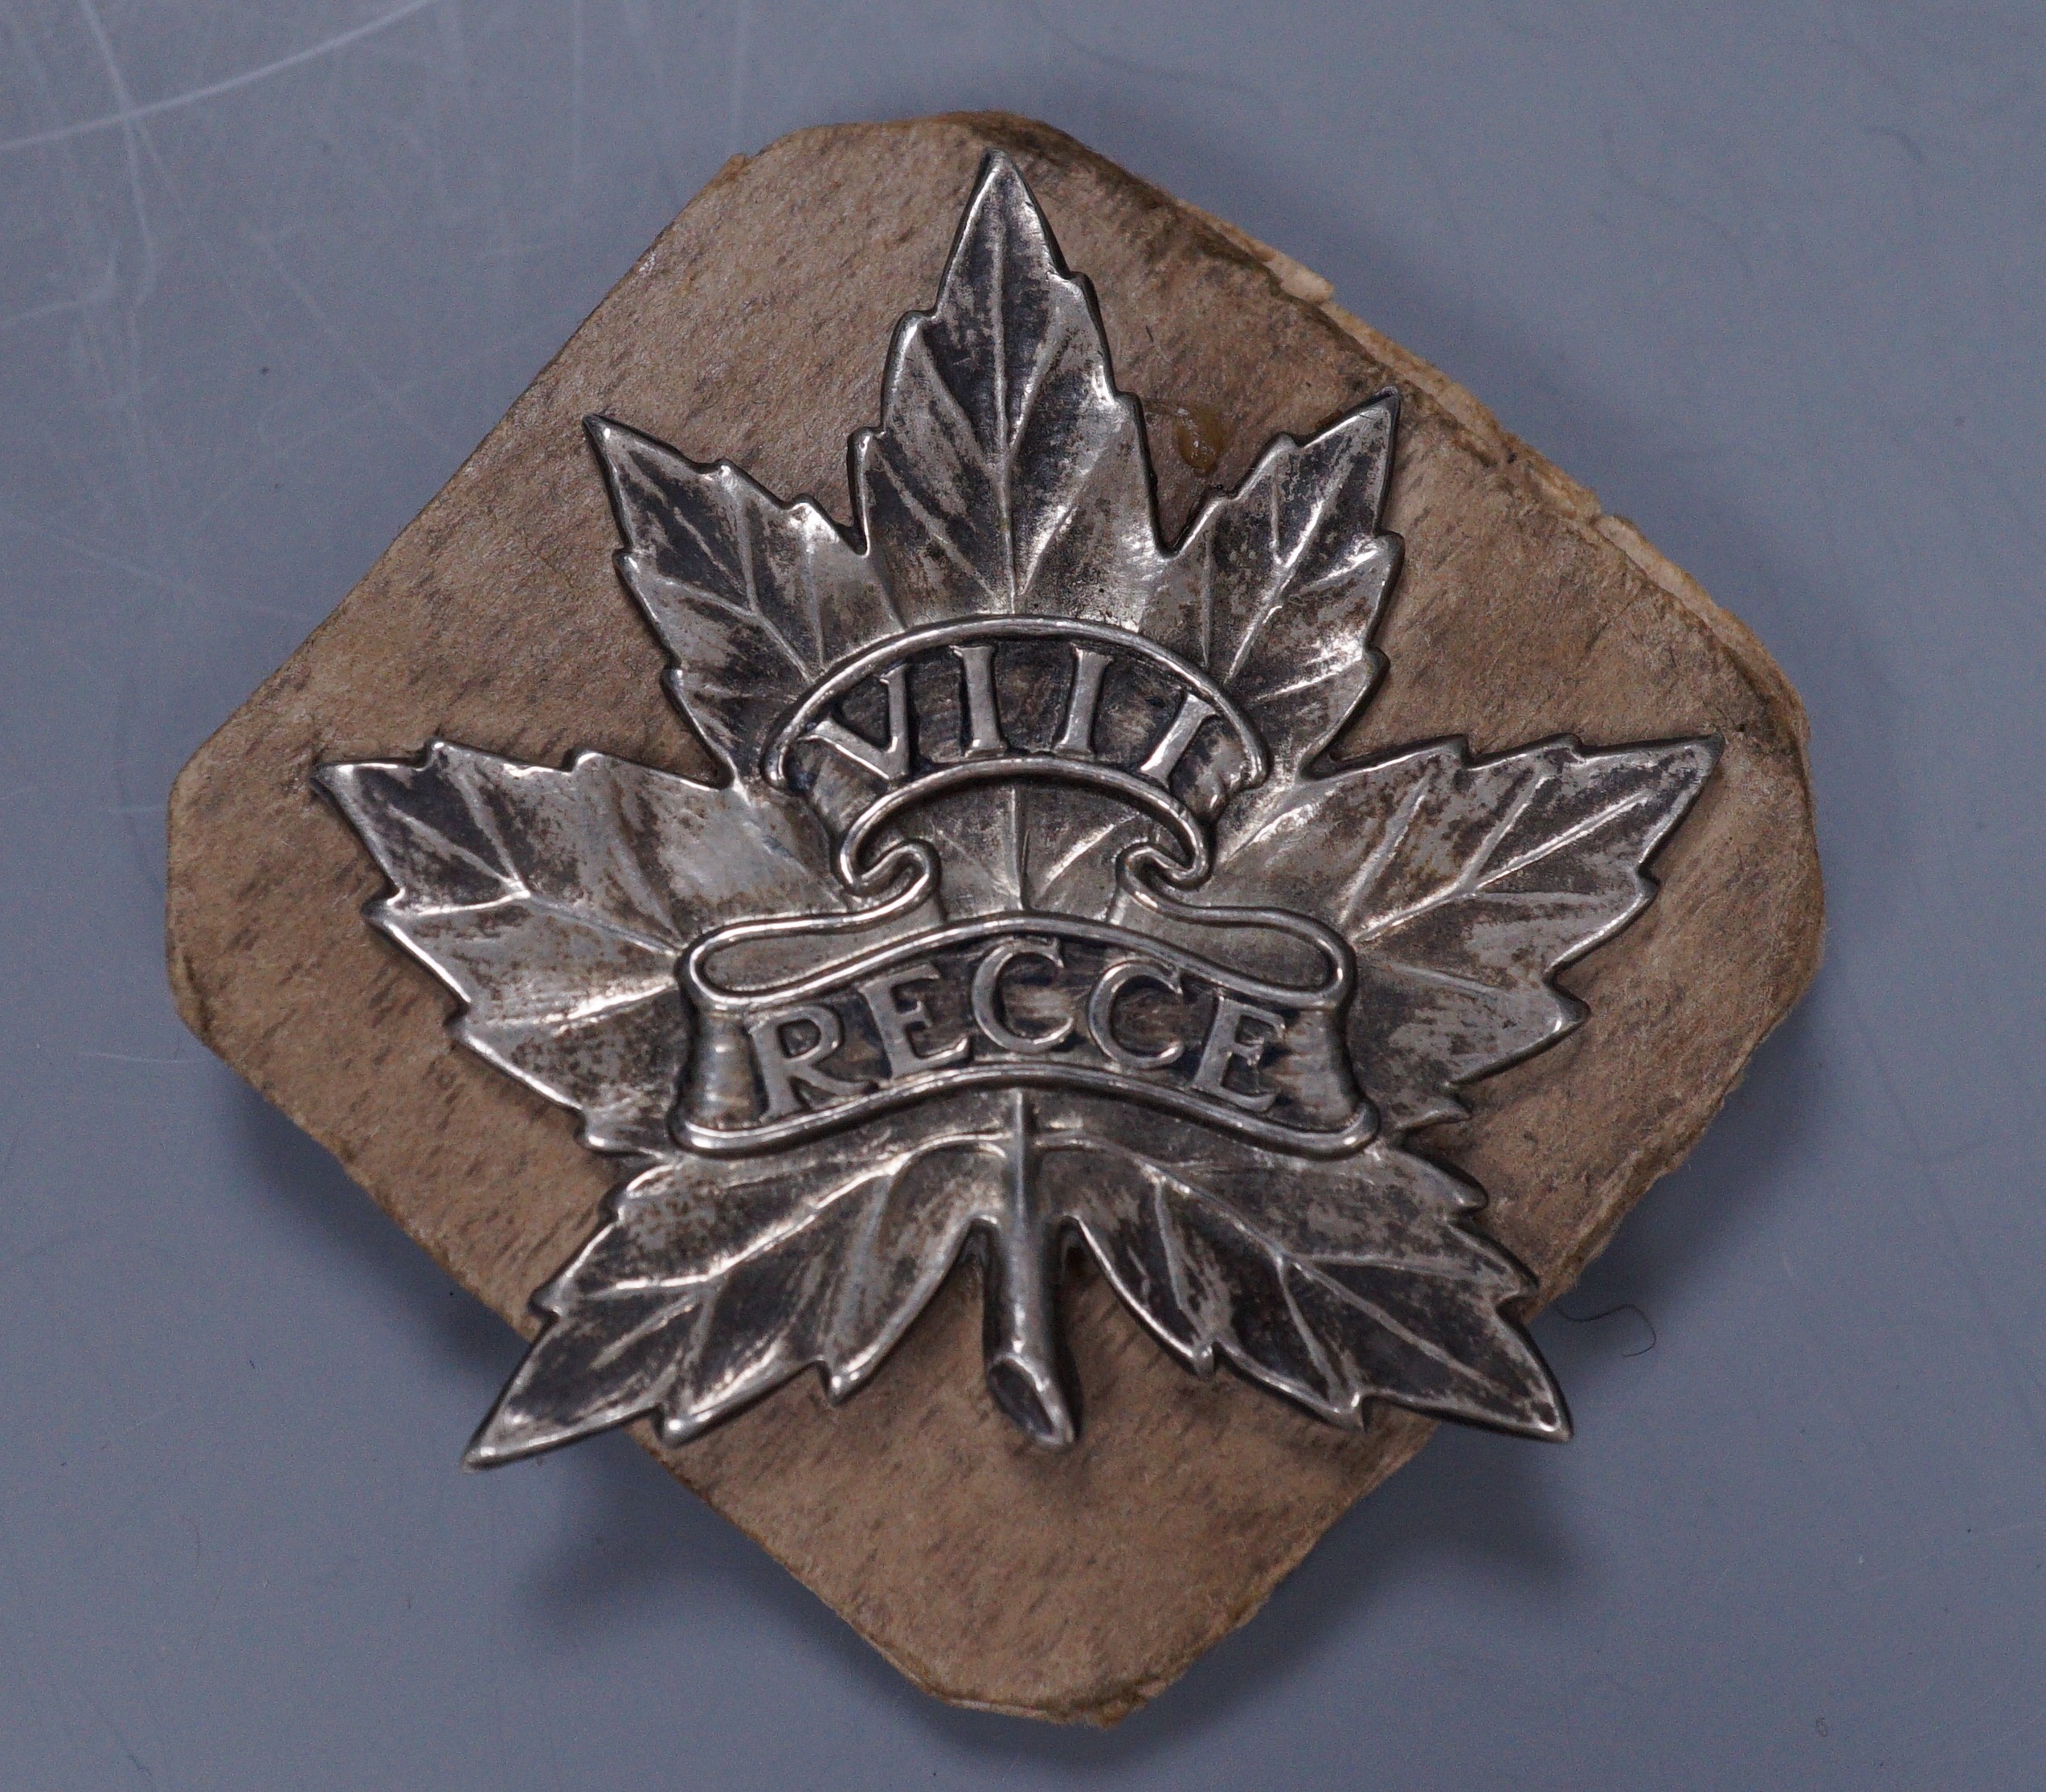 A rare WWII Canadian 8th Reconnaissance cap badge, made in 1942